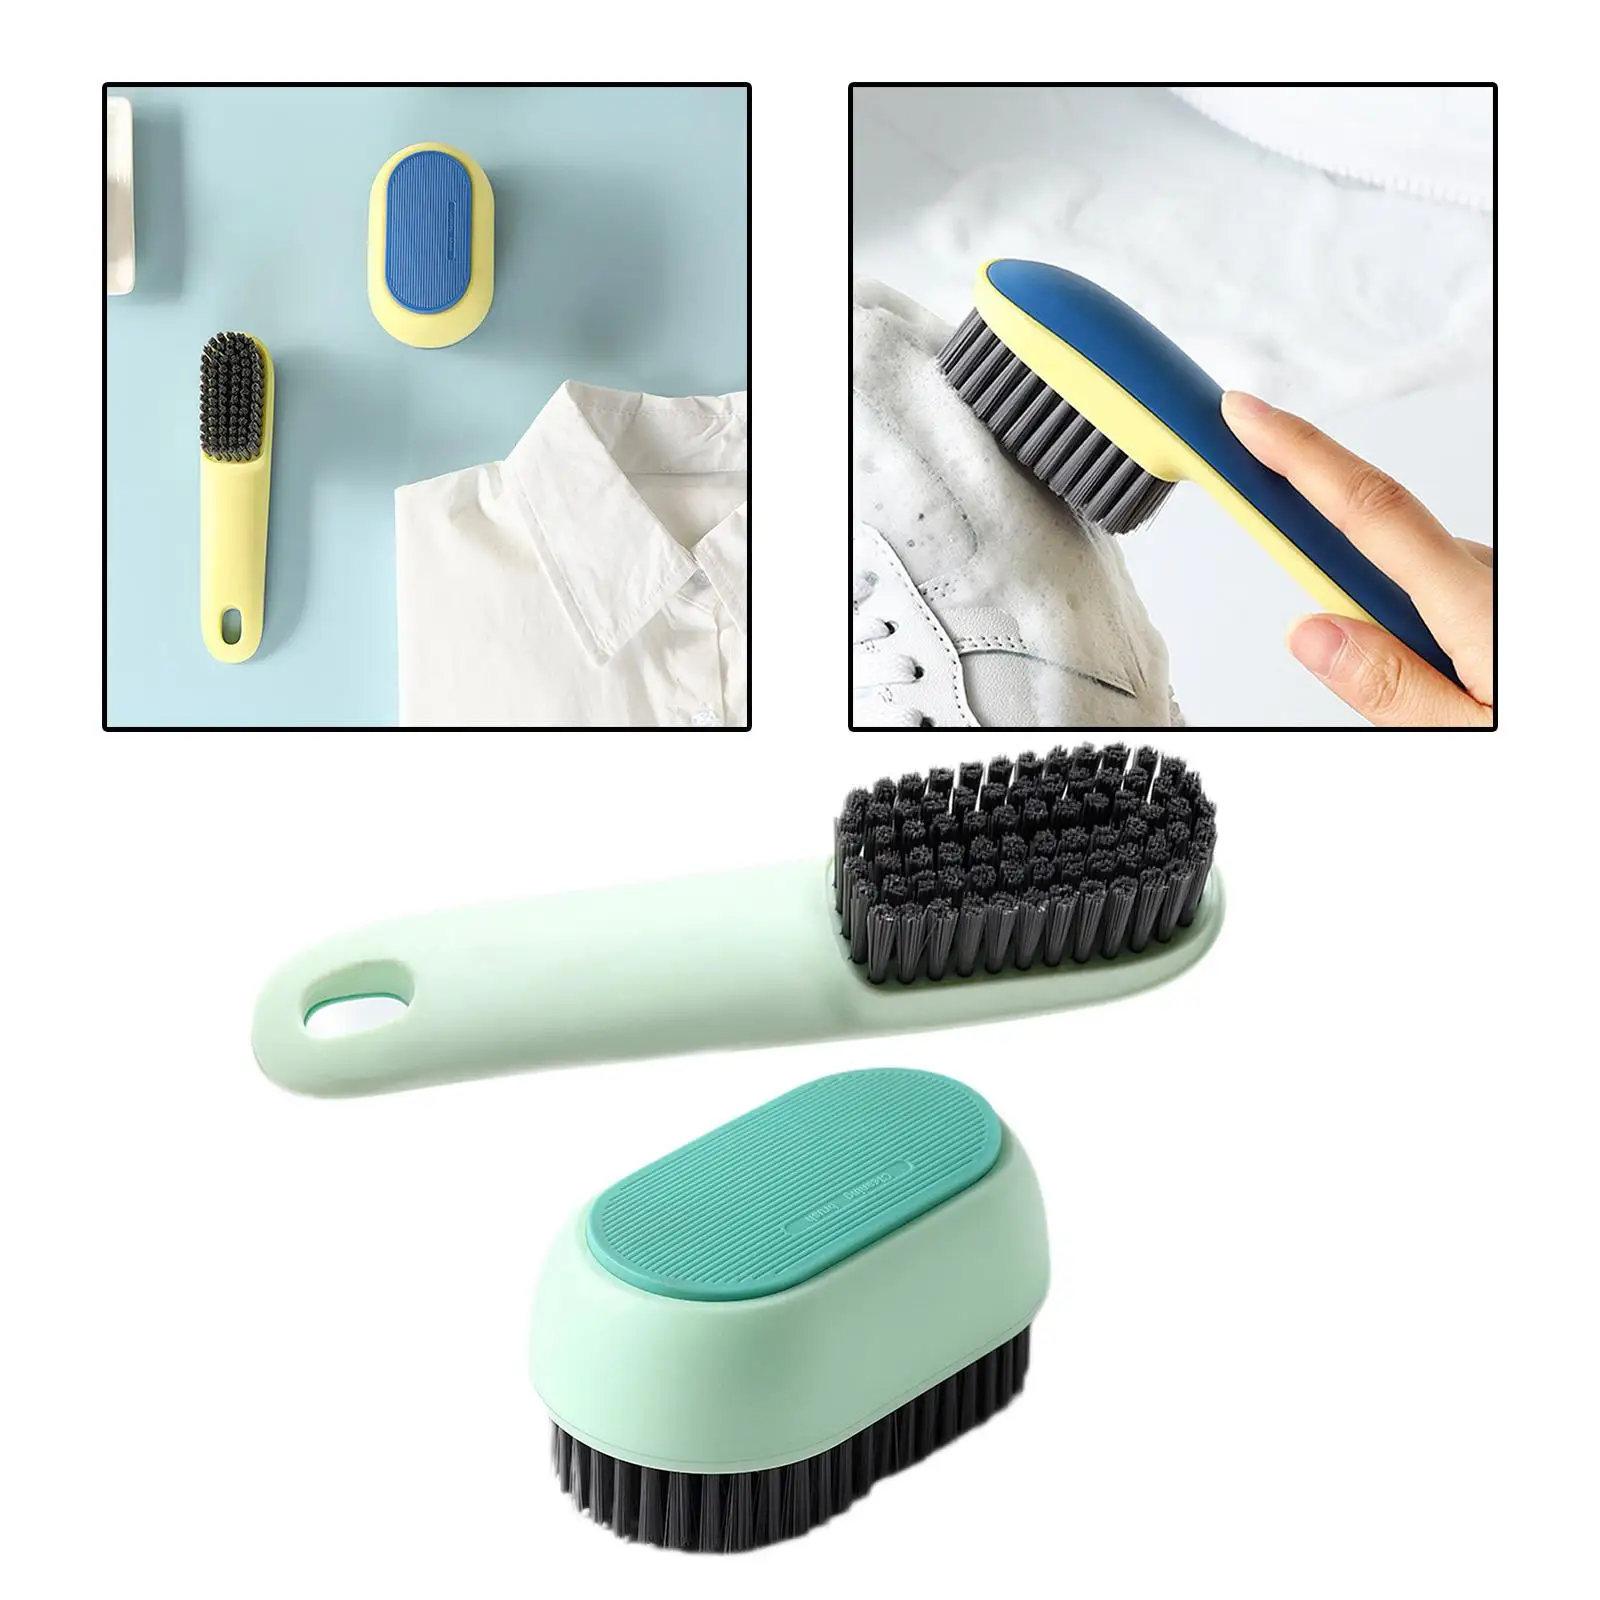 Multipurpose Shoe Brush Cleaner Cleaning Brush with Clothes Brush Cleaning Tools Shoe Shine Brush for Bathroom Travel Outdoor